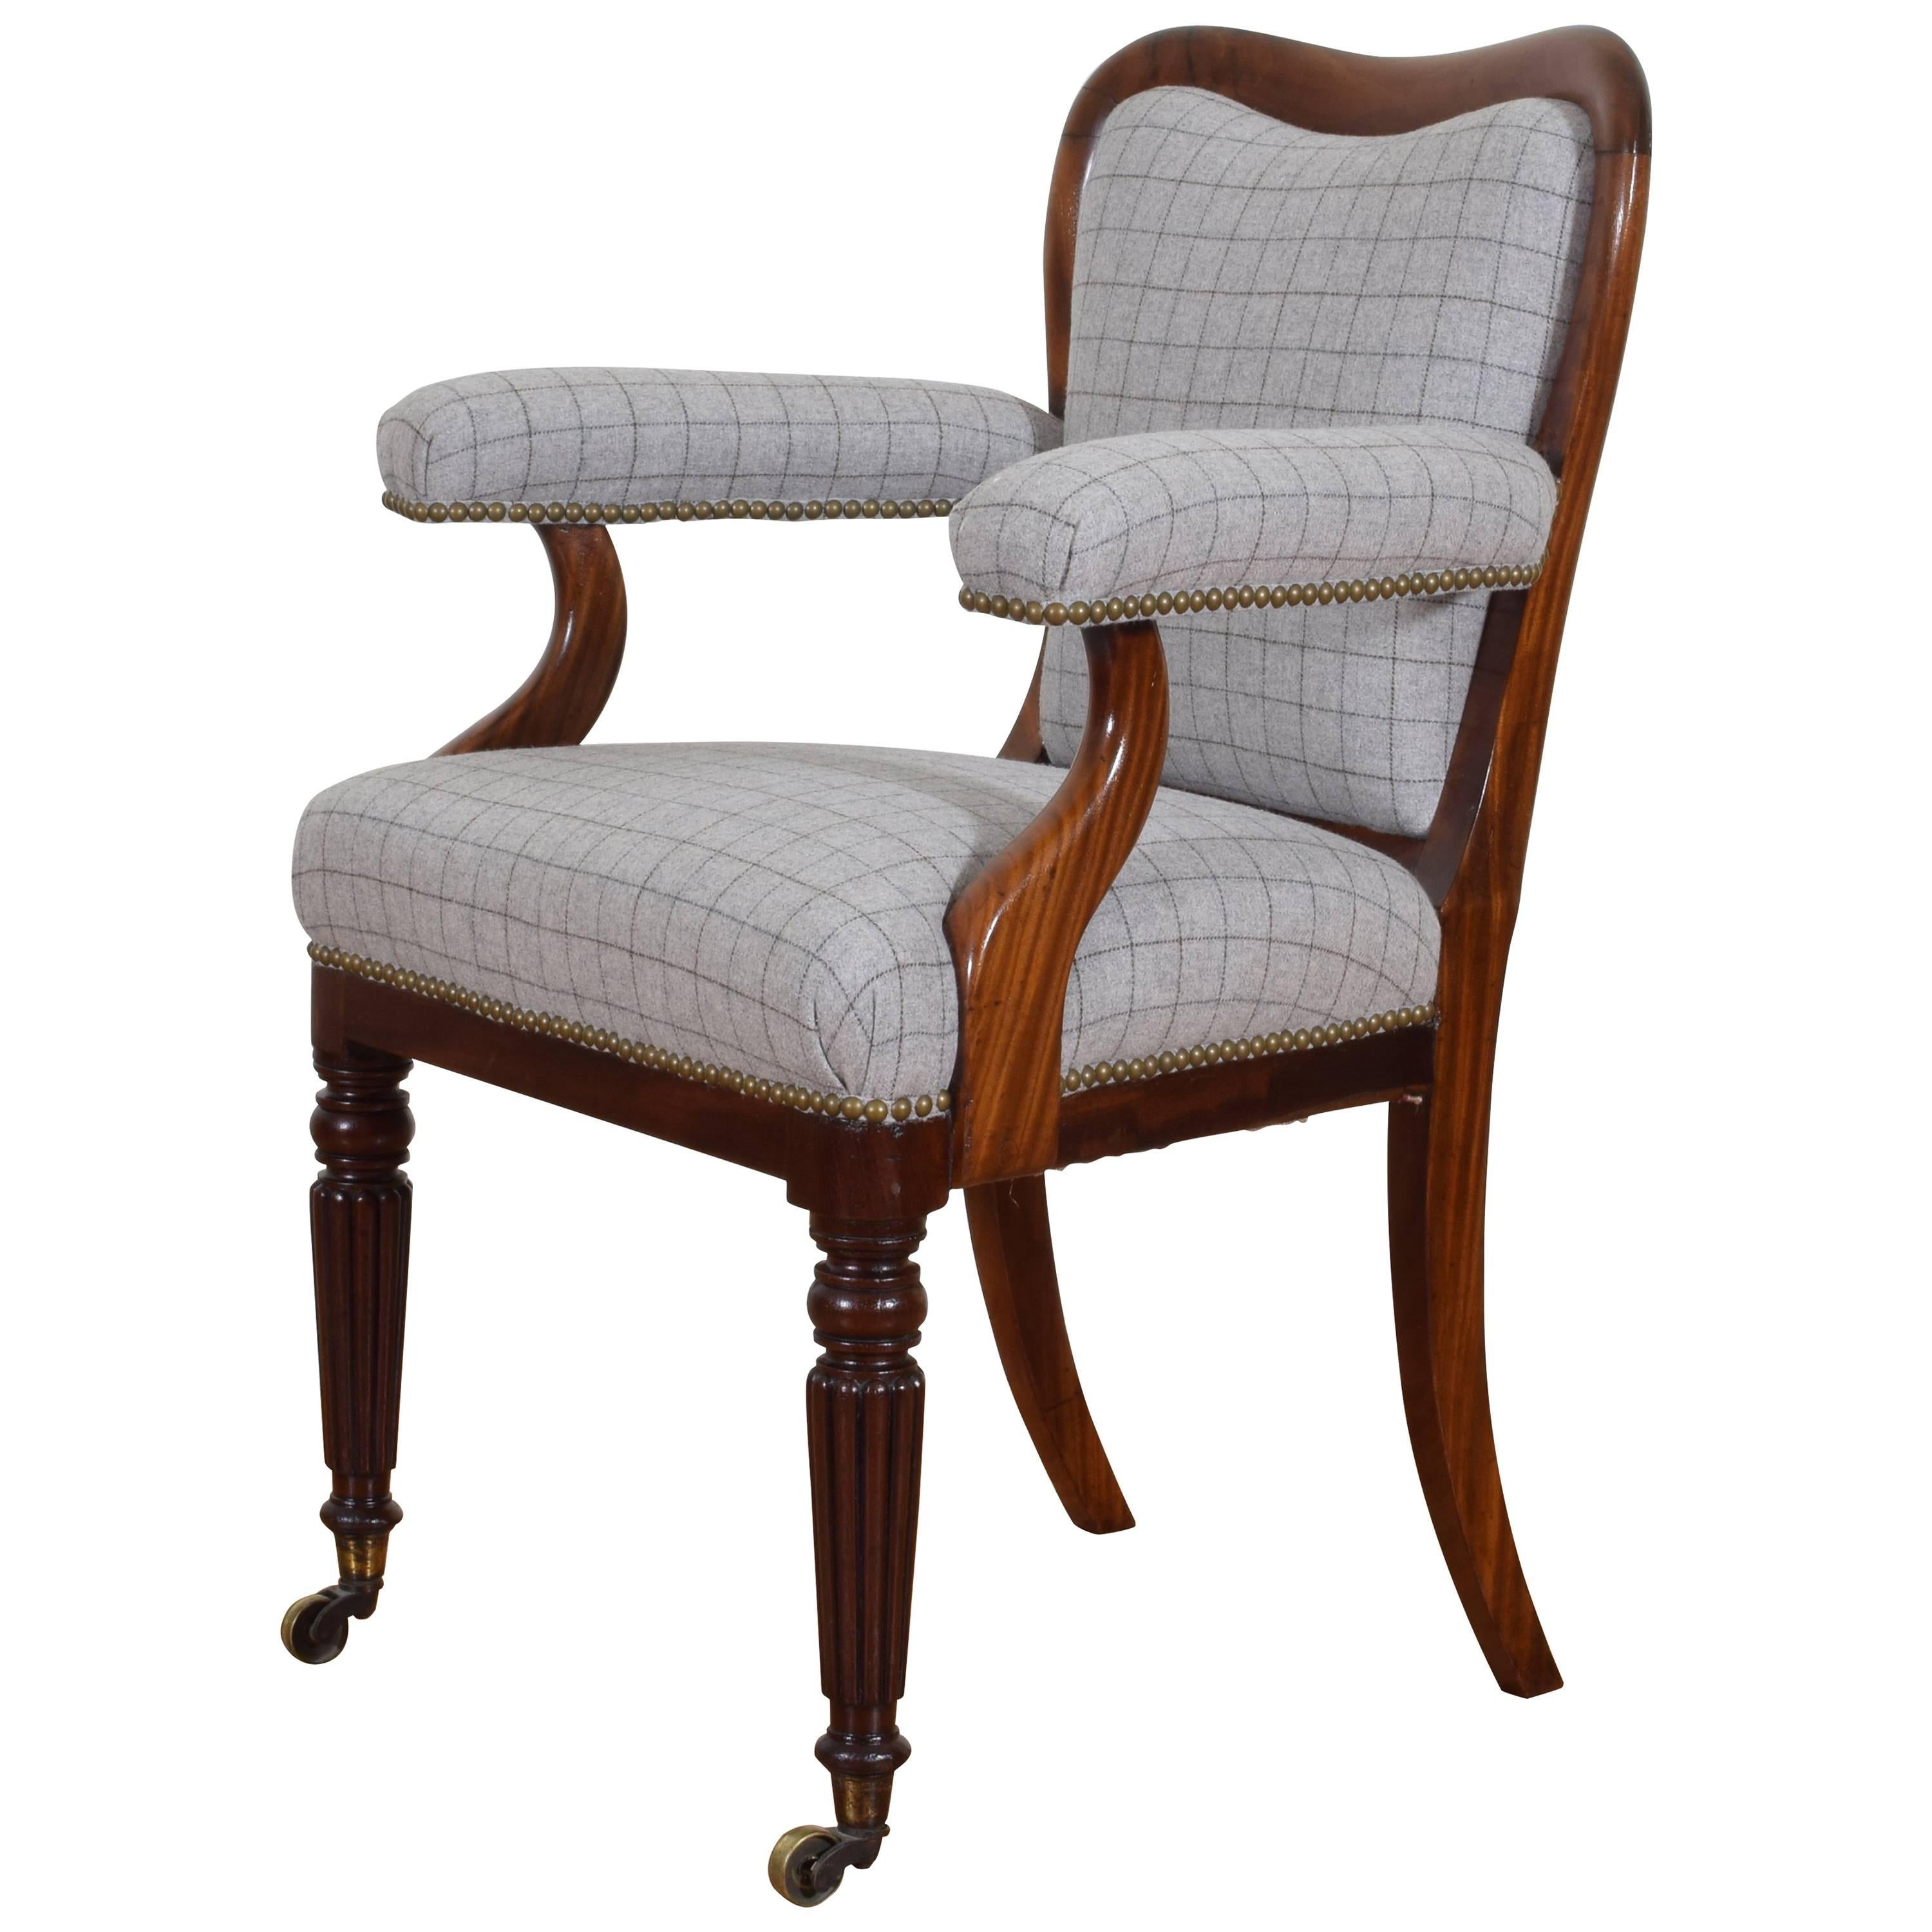 English William IV Period Mahogany and Upholstered Armchair, circa 1840